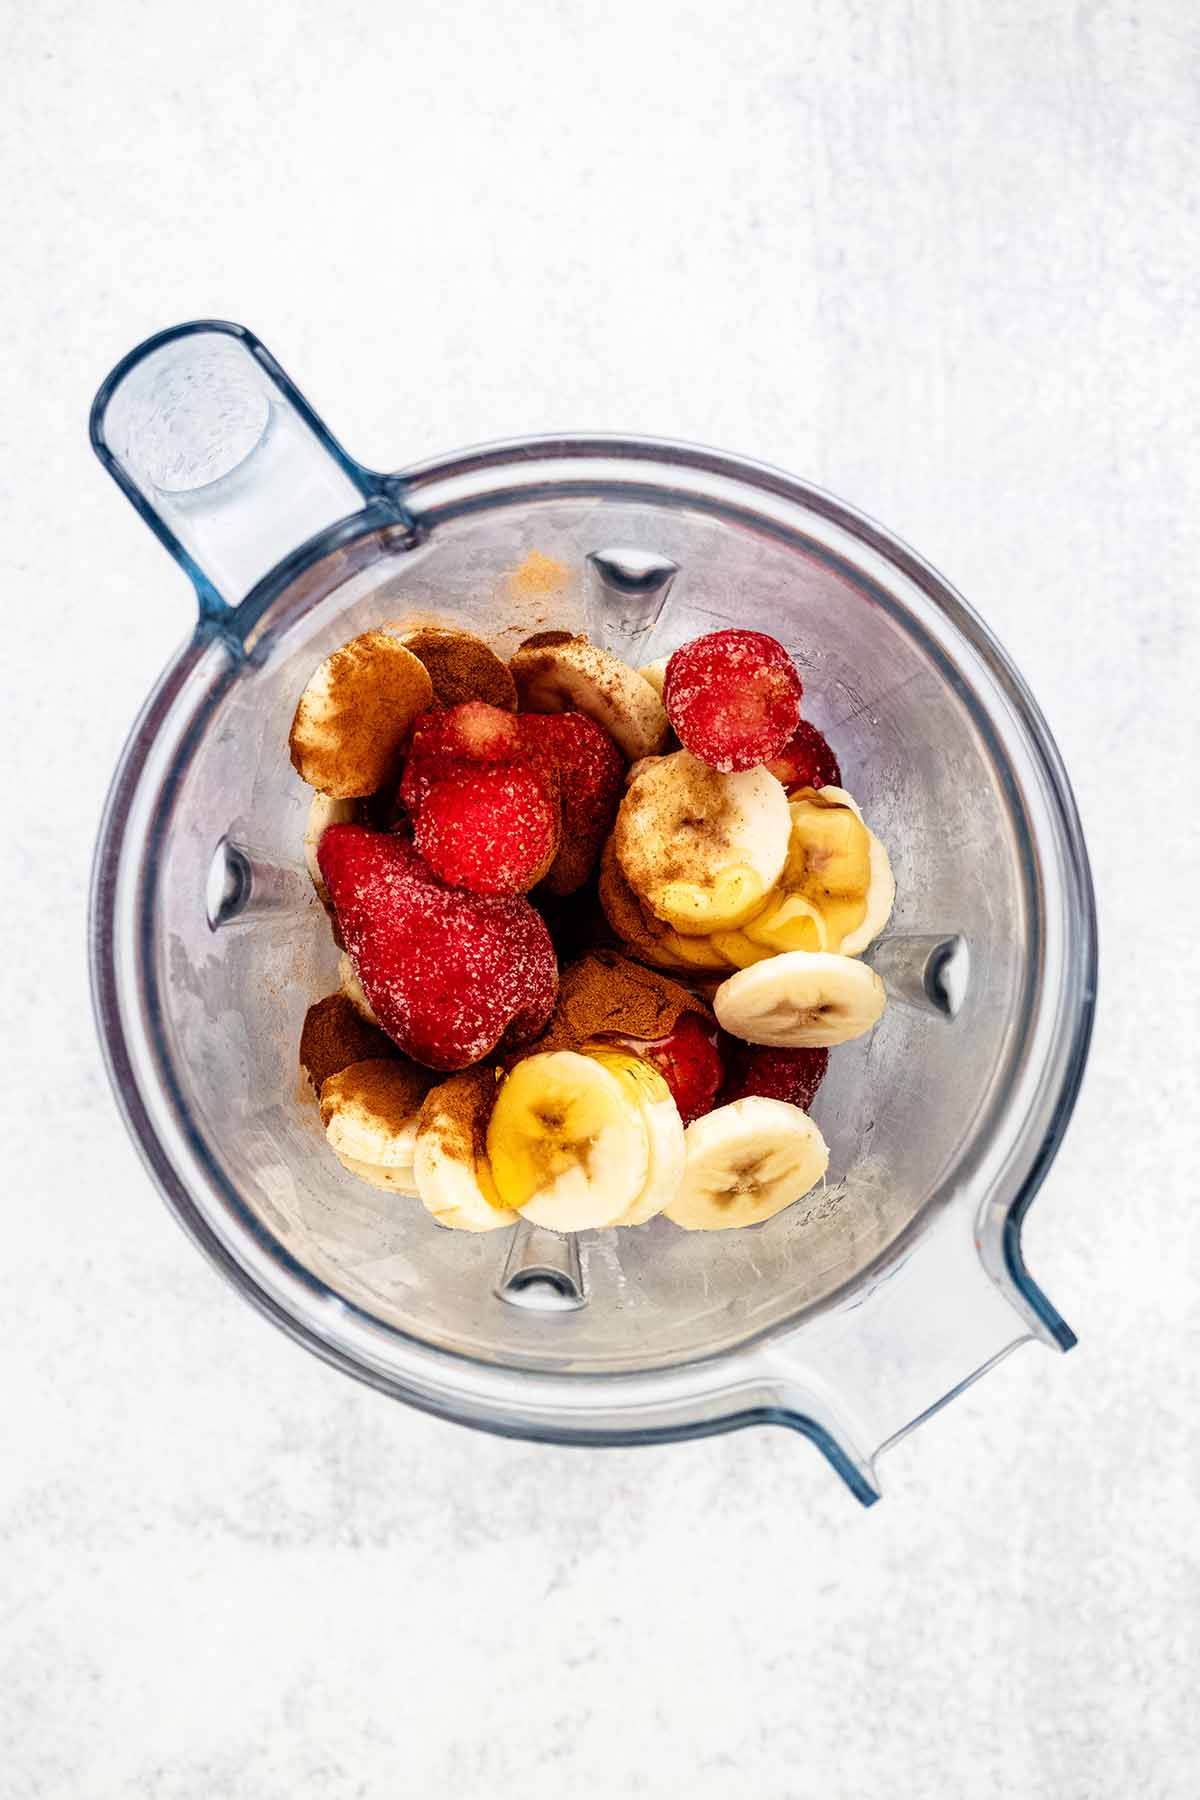 Strawberry banana smoothie bowl ingredients in a blender.